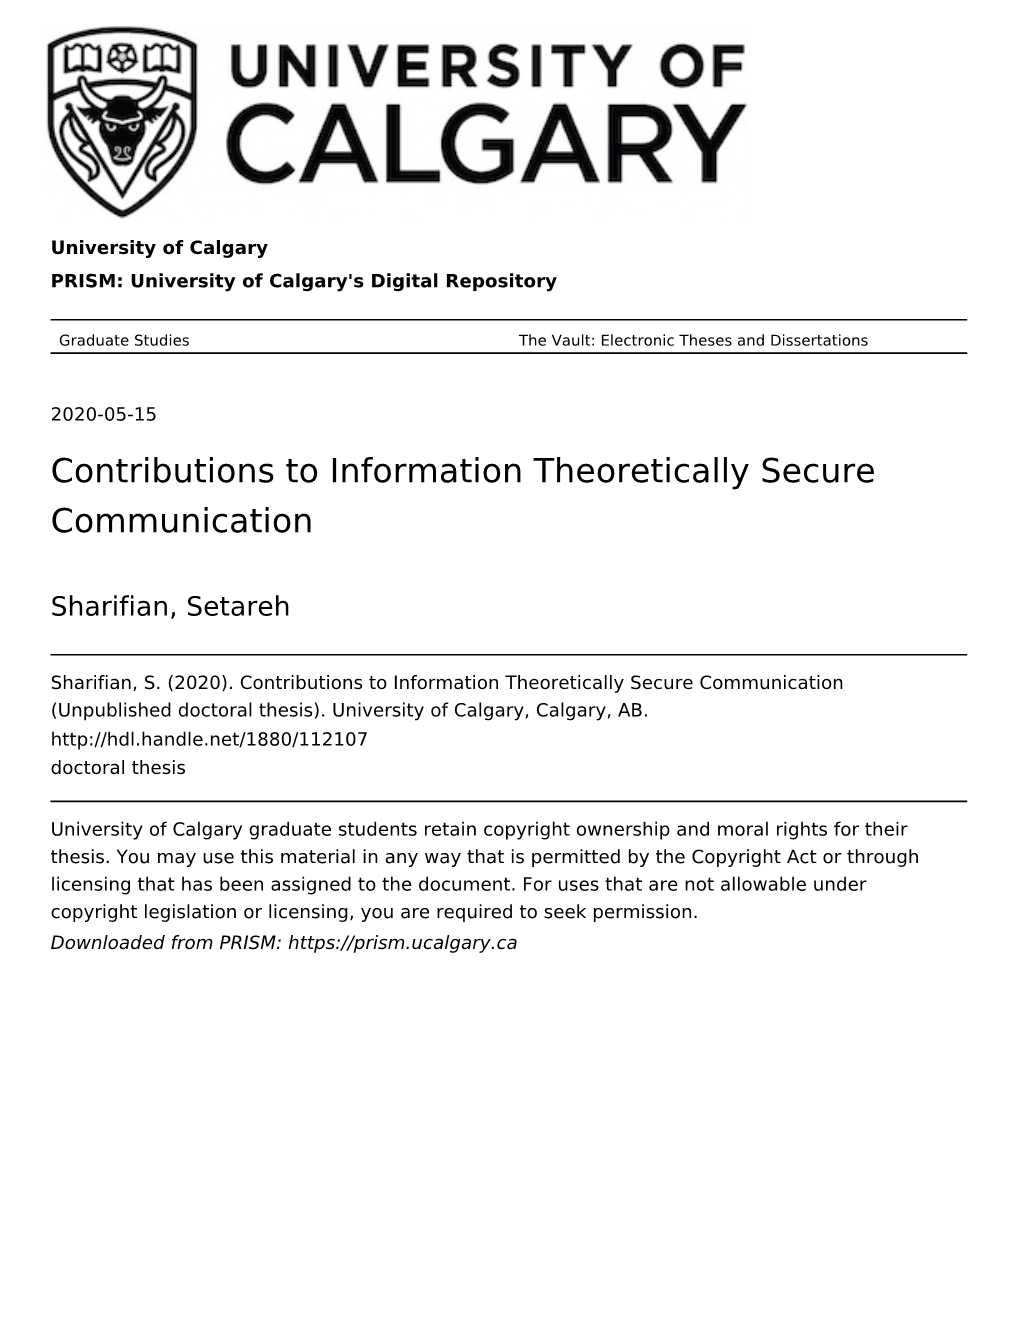 Contributions to Information Theoretically Secure Communication